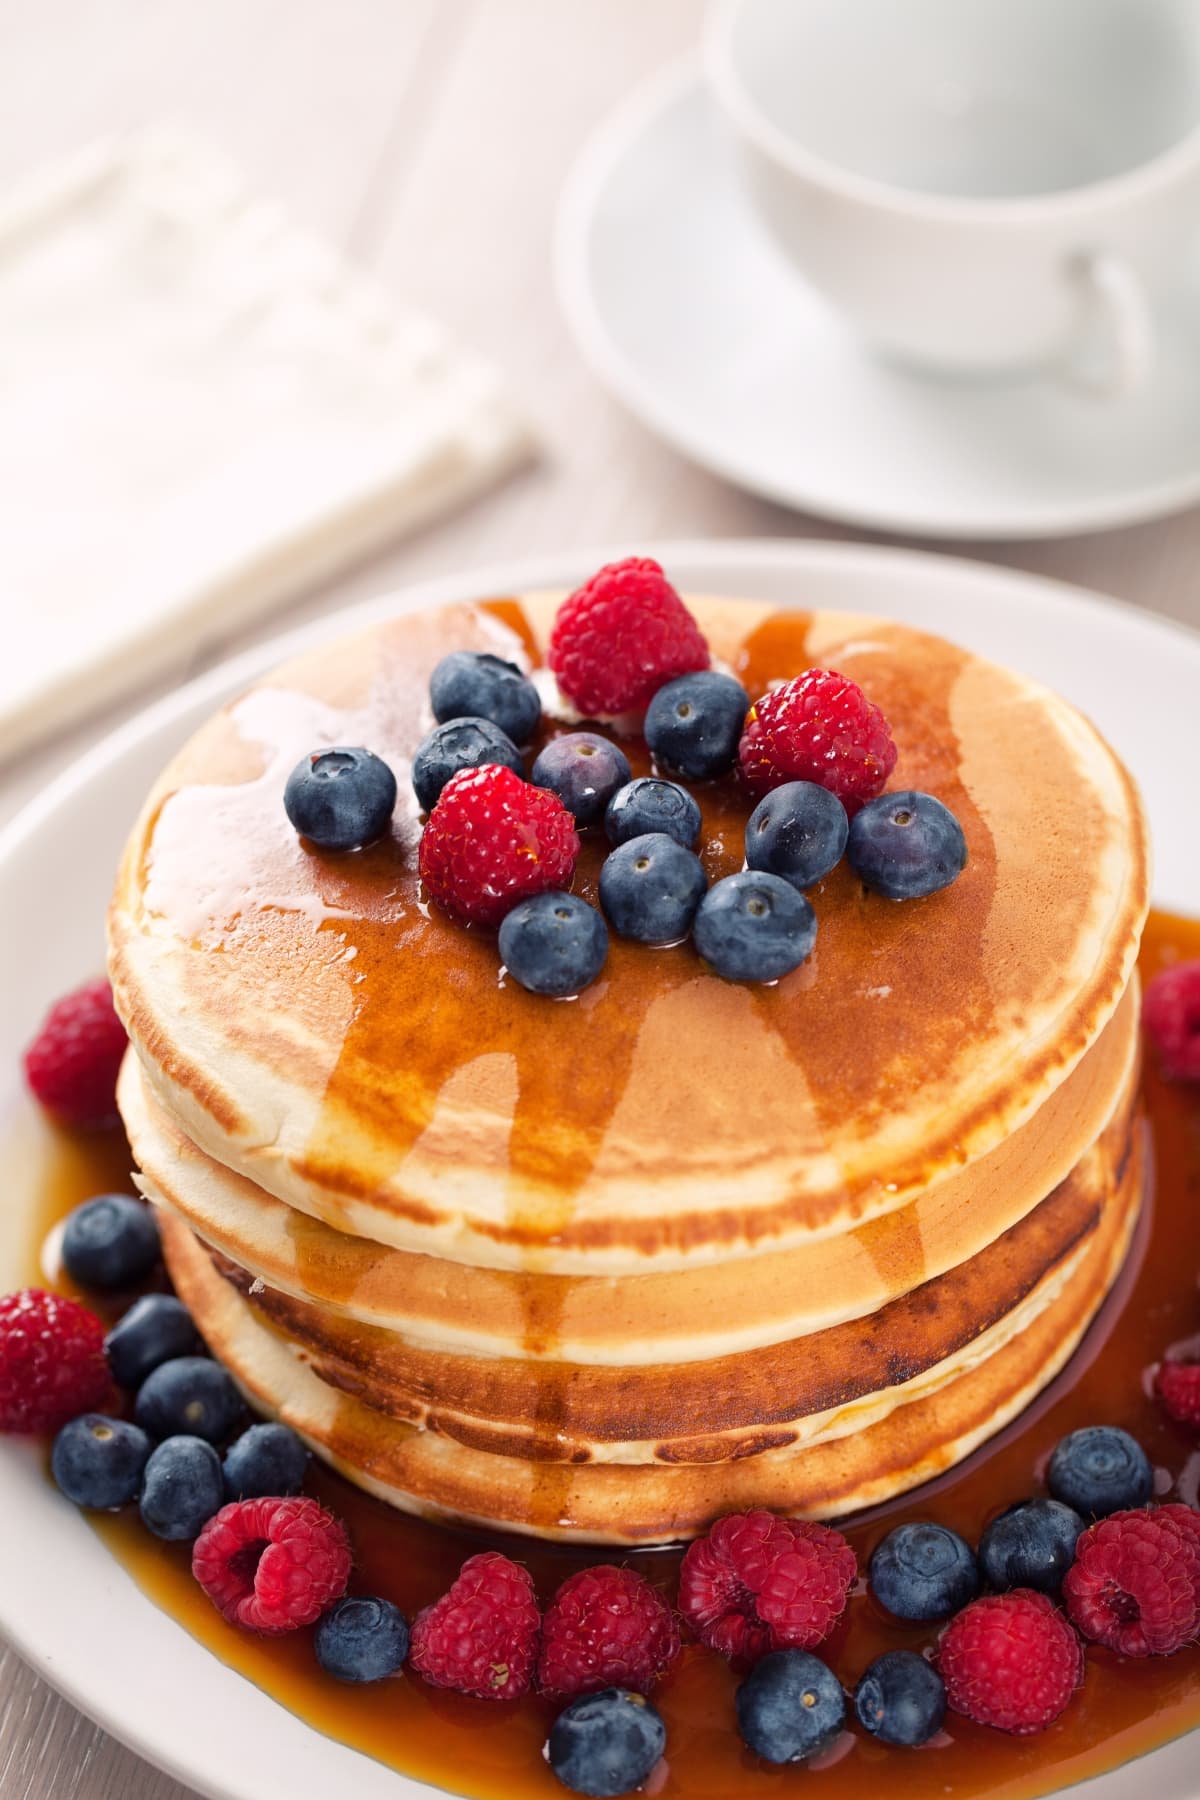 Stack of fluffy Bisquick pancakes topped with berries drizzled with syrup.